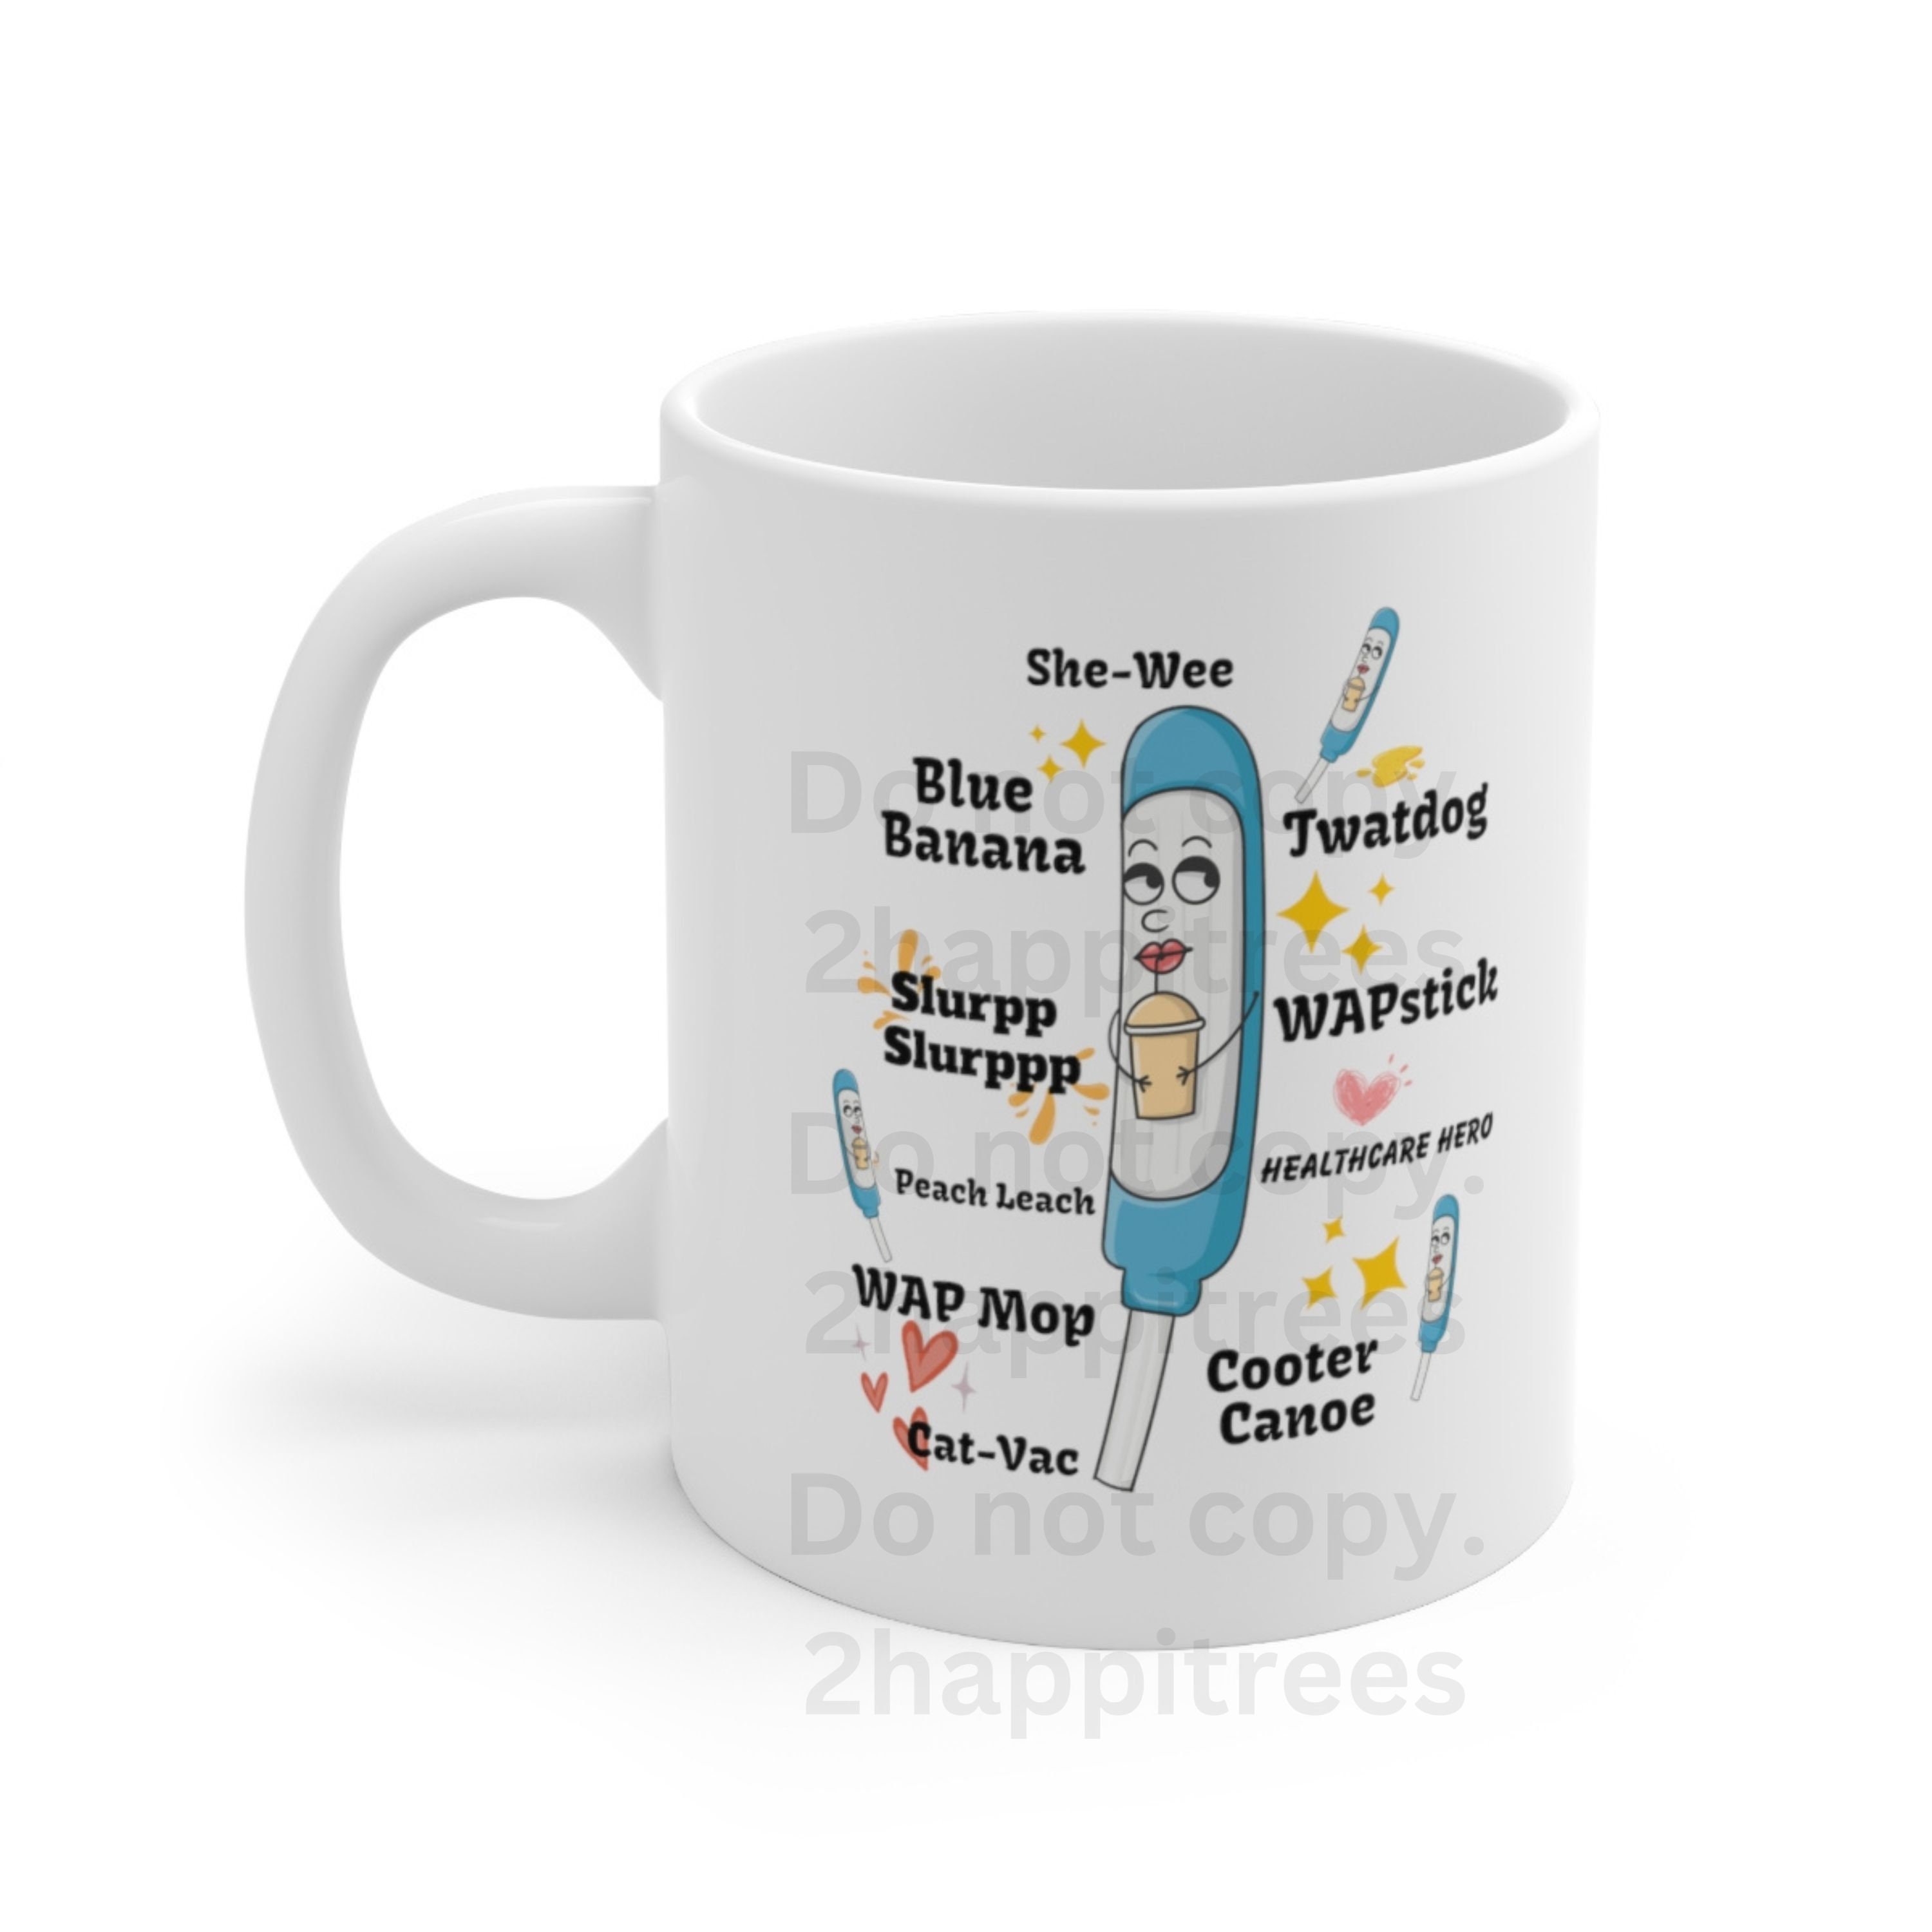  DesiDD Gifts for Older Women - Gifts for The Elderly Woman -  Gifts for 40 50 60 70 80 Year Old Woman - Coffee Mug for Mom, Grandmother,  Grandma - Ceramic Cup : Home & Kitchen